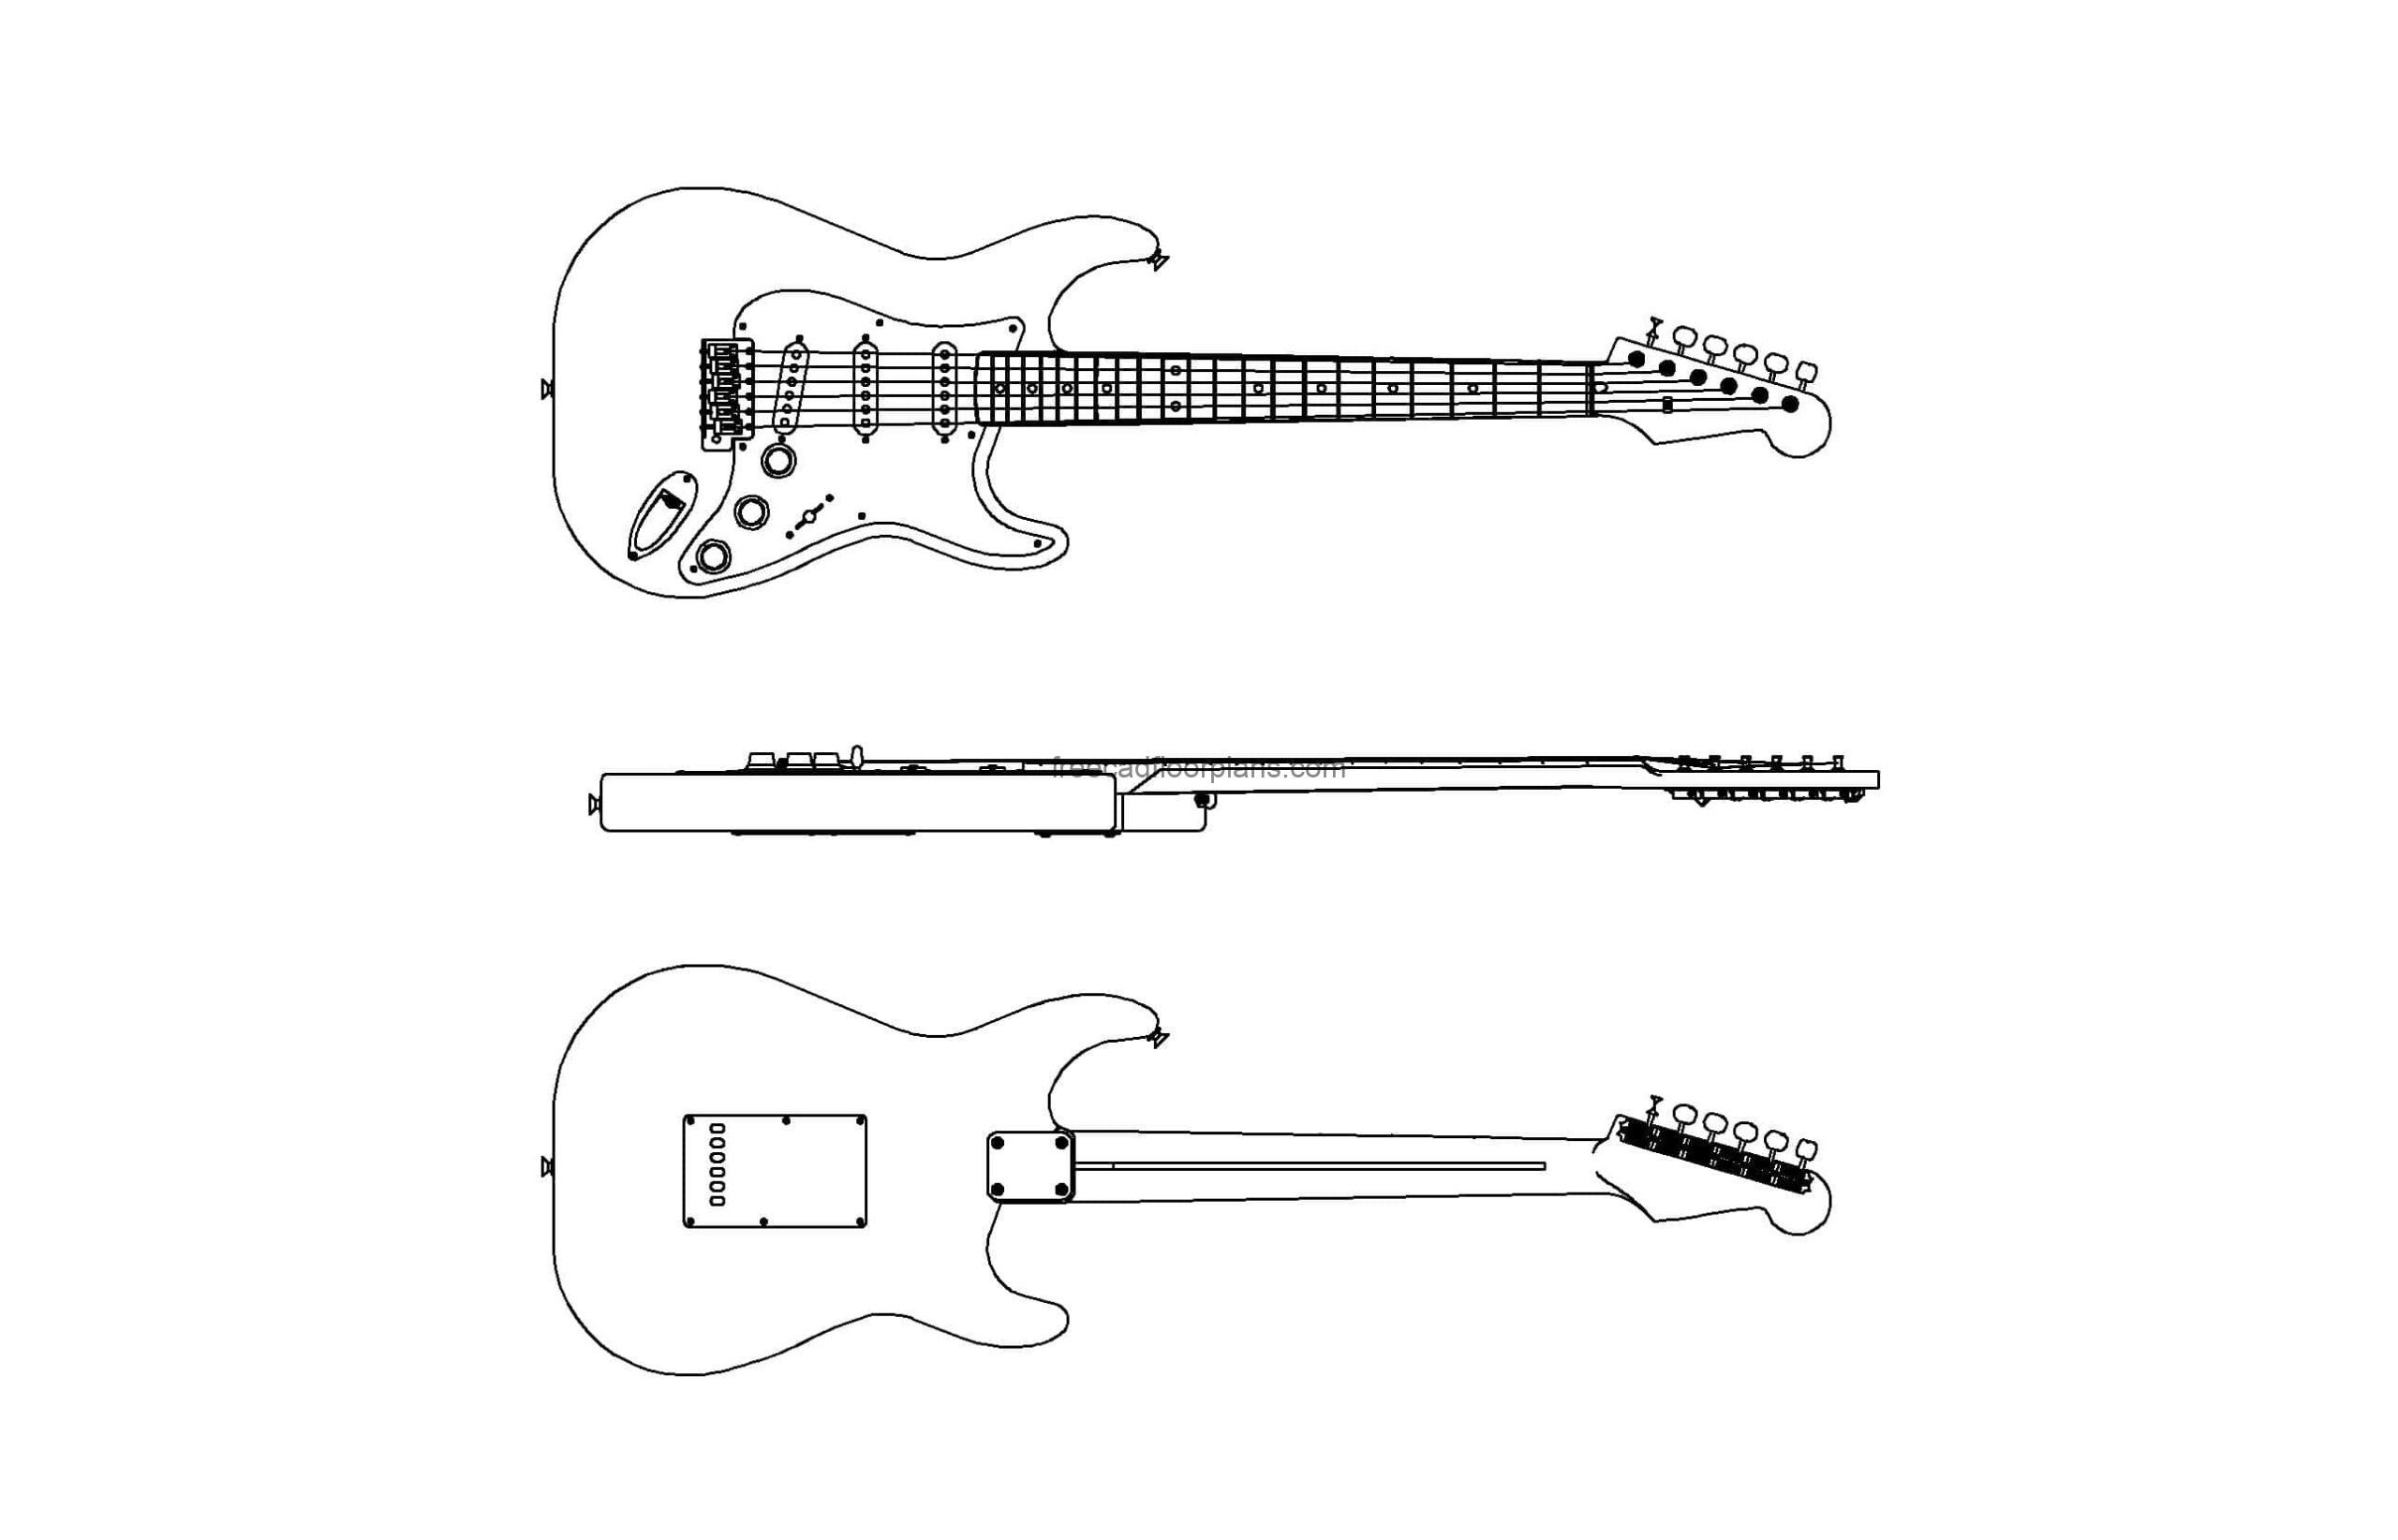 fender stratocaster autocad drawing, 2d views plan and elevation, dwg file free for download